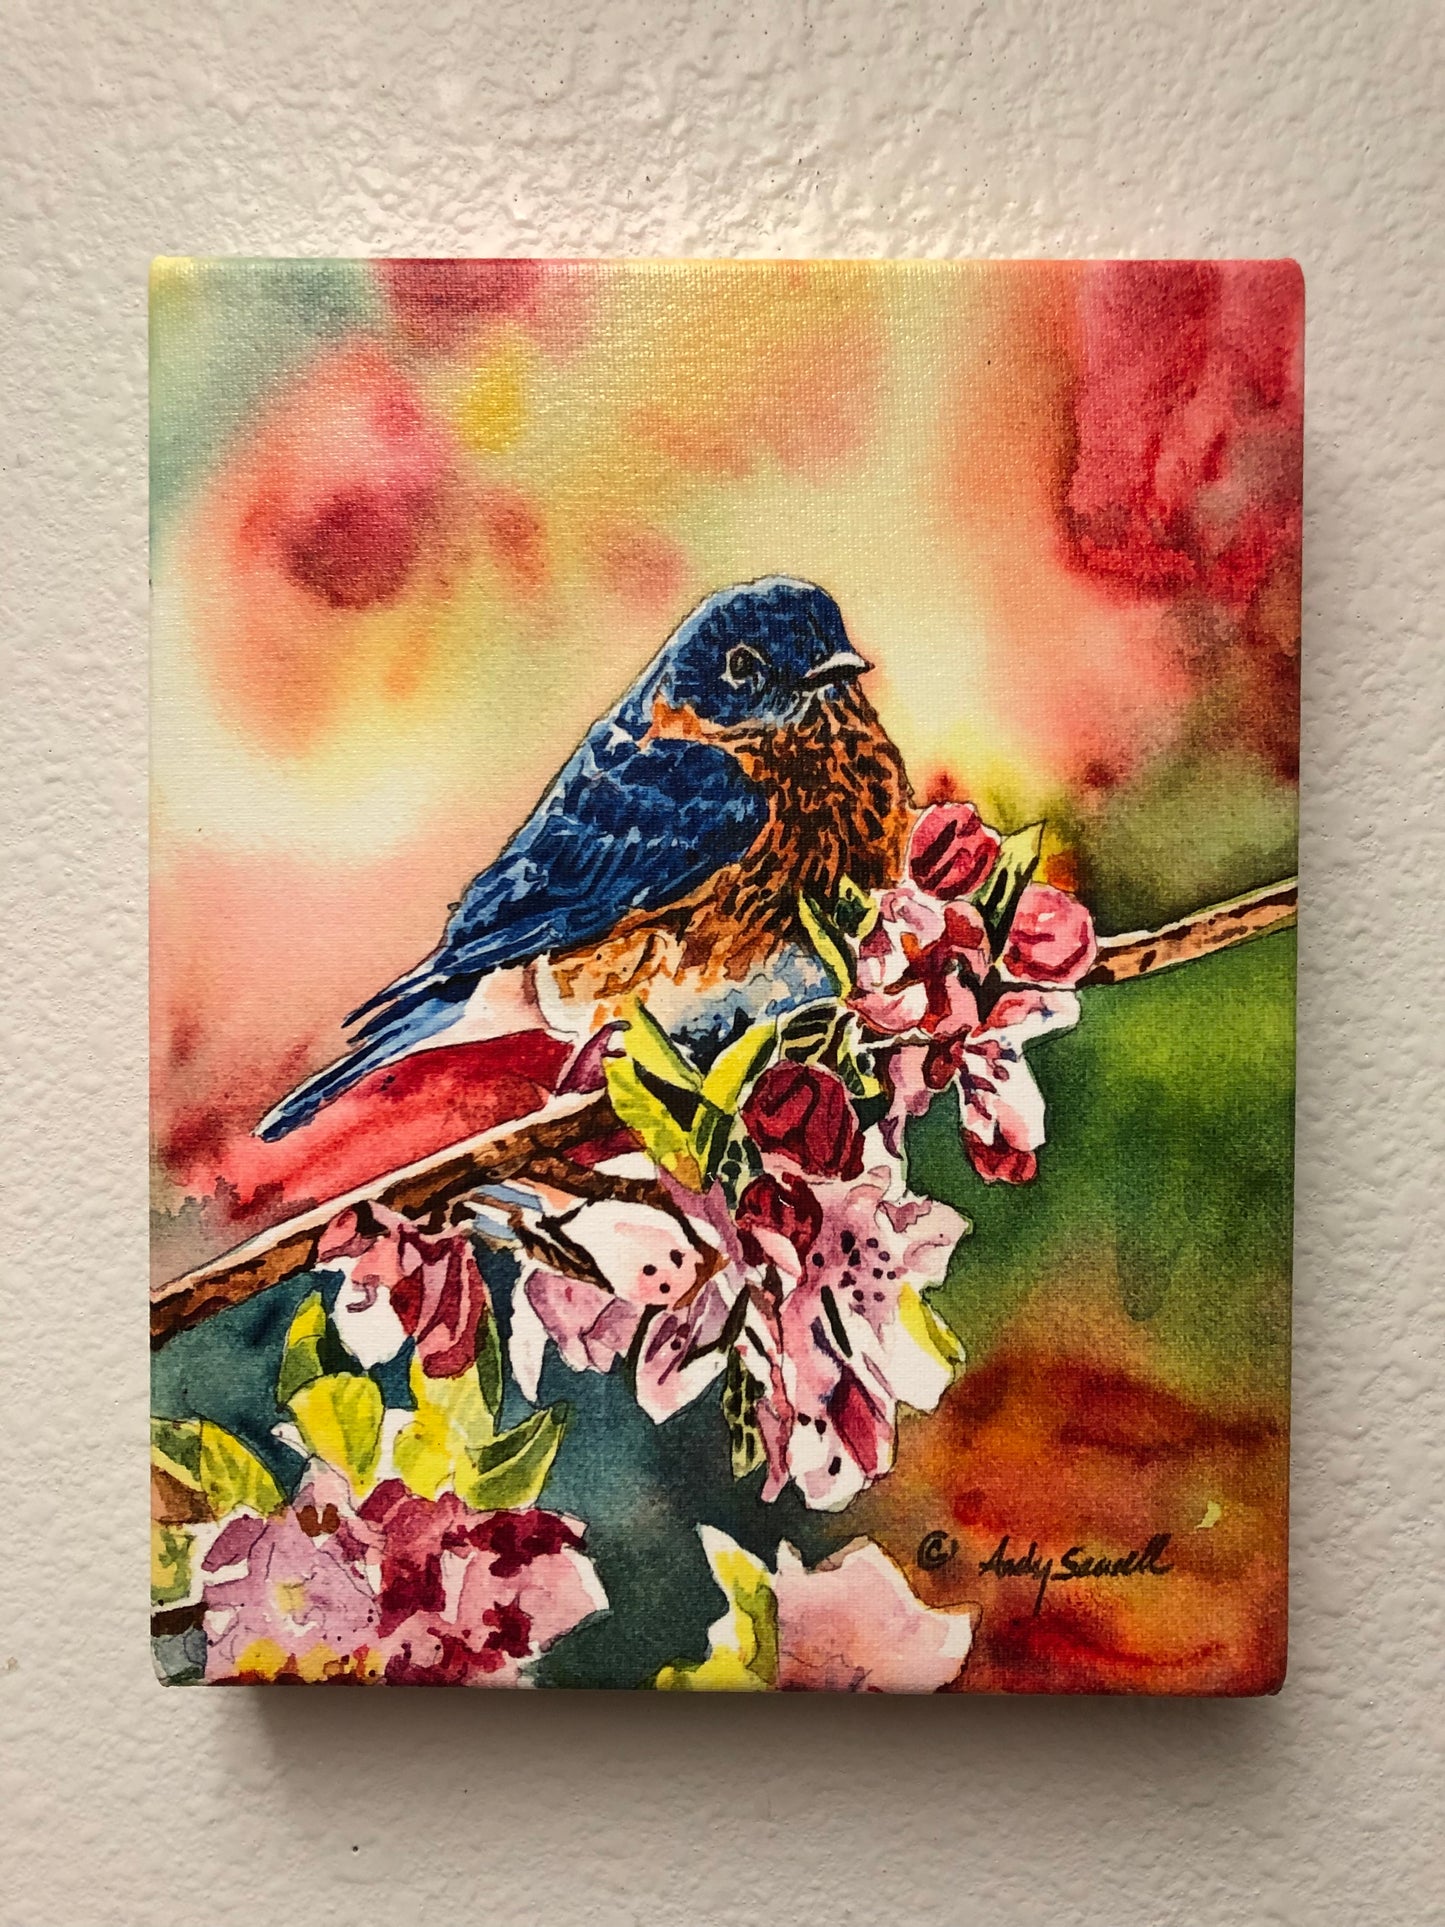 "Bluebird in the Blossoms" - Original watercolor painting, or paper or canvas Giclée art print of a Western Bluebird in the blossoms.